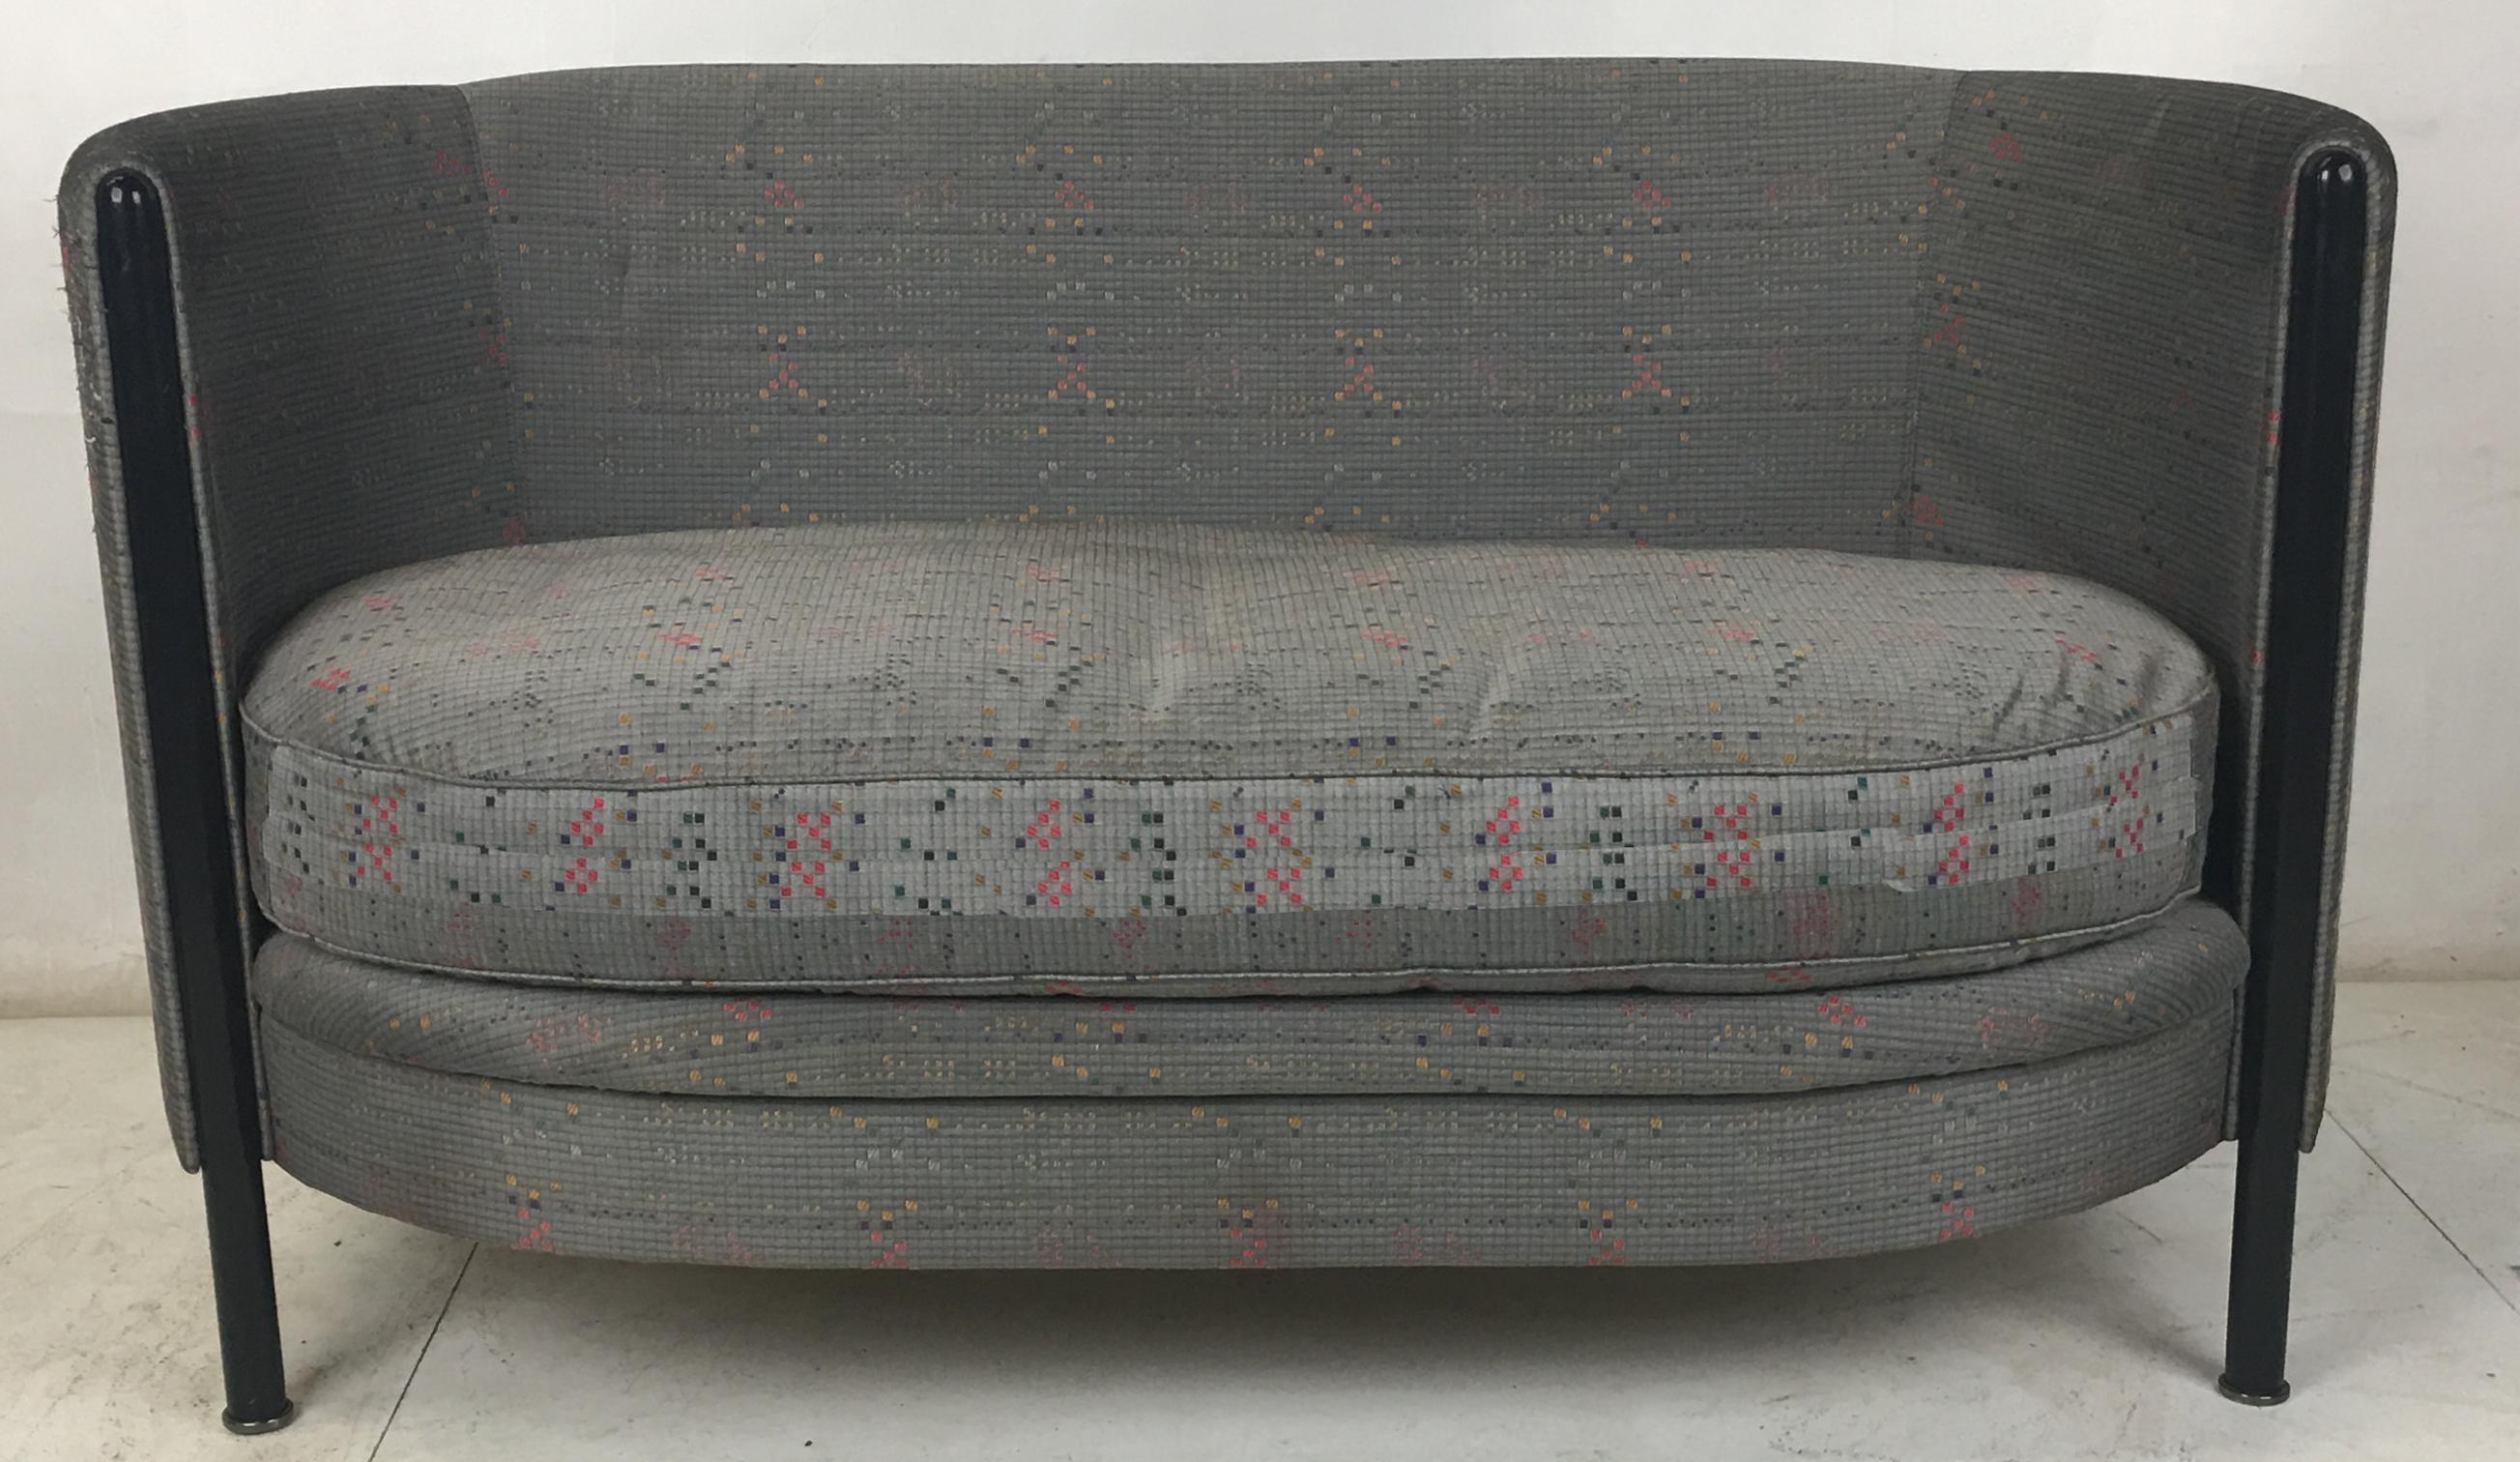 Beautifully rendered shelter style settee by the venerable Moroso, Italy. The quality and workmanship are first rate as expected from Moroso. Original upholstery is worn and should be replaced. Legs are enameled steel with polished steel glides.